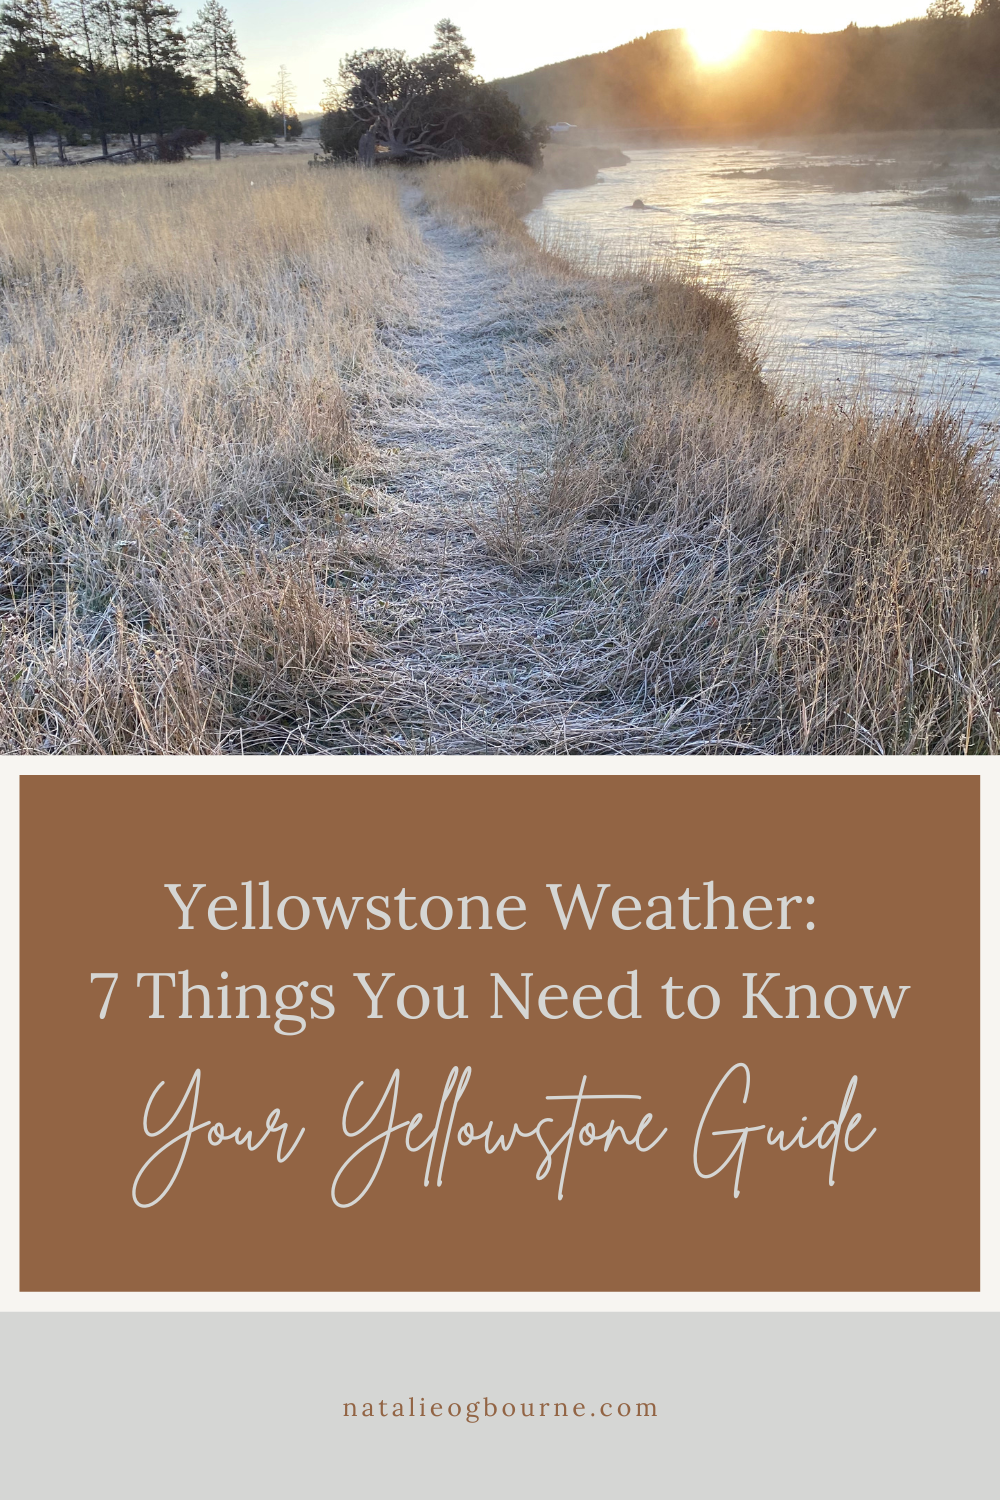 7 things to know about Yellowstone's weather: Know before you go